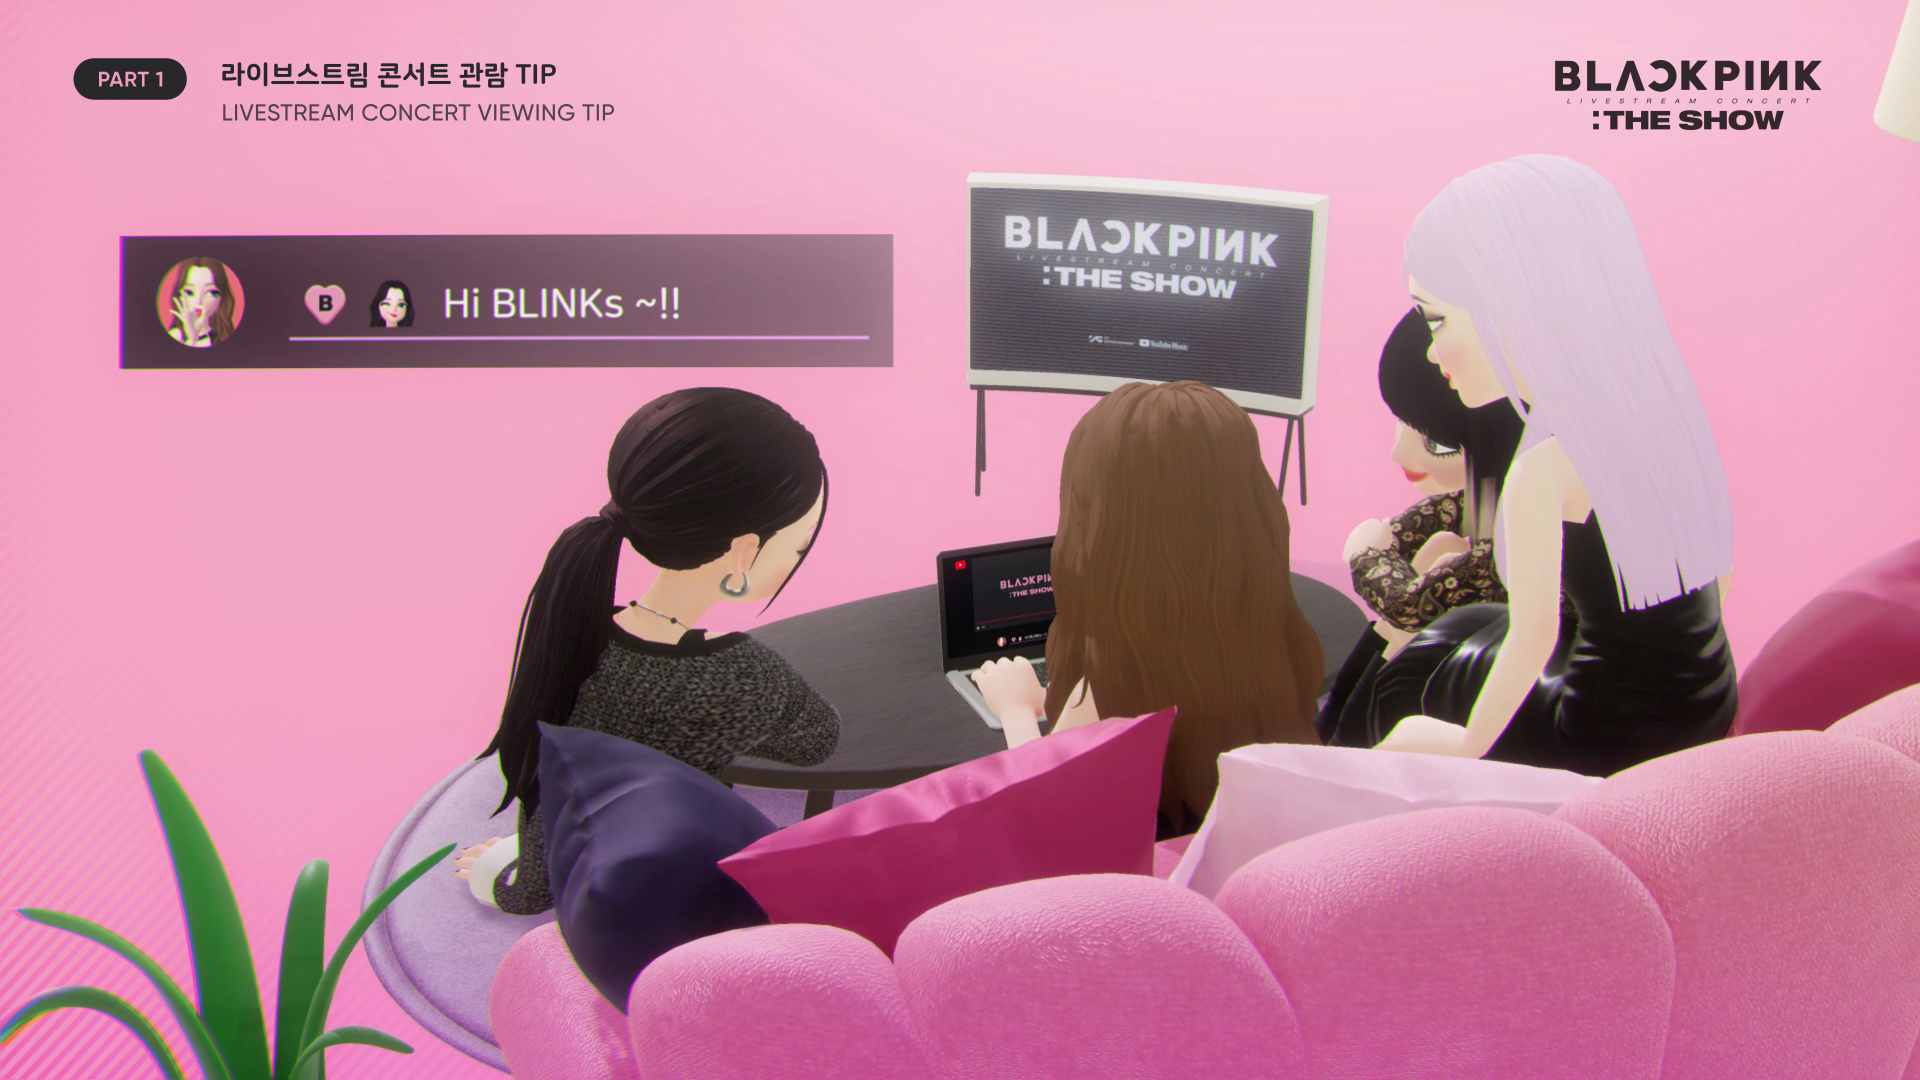 BLACKPINK - ‘THE SHOW’ VIEWING TIP